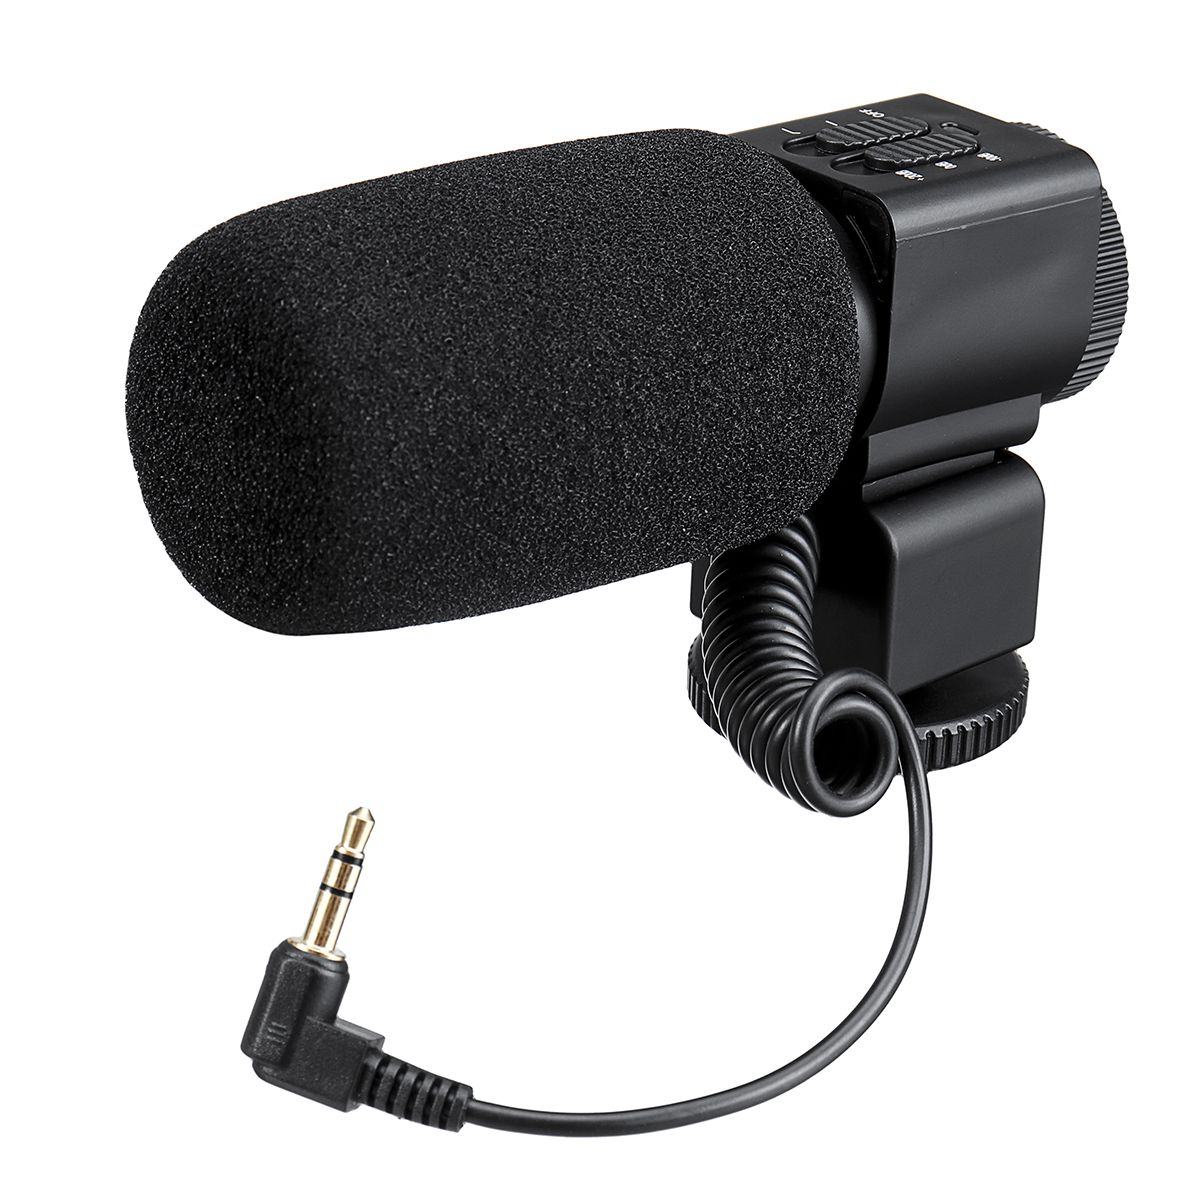 35mm-External-Stereo-Microphone-MIC-for-Canon-DSLR-Camera-DV-Camcorder-1653411